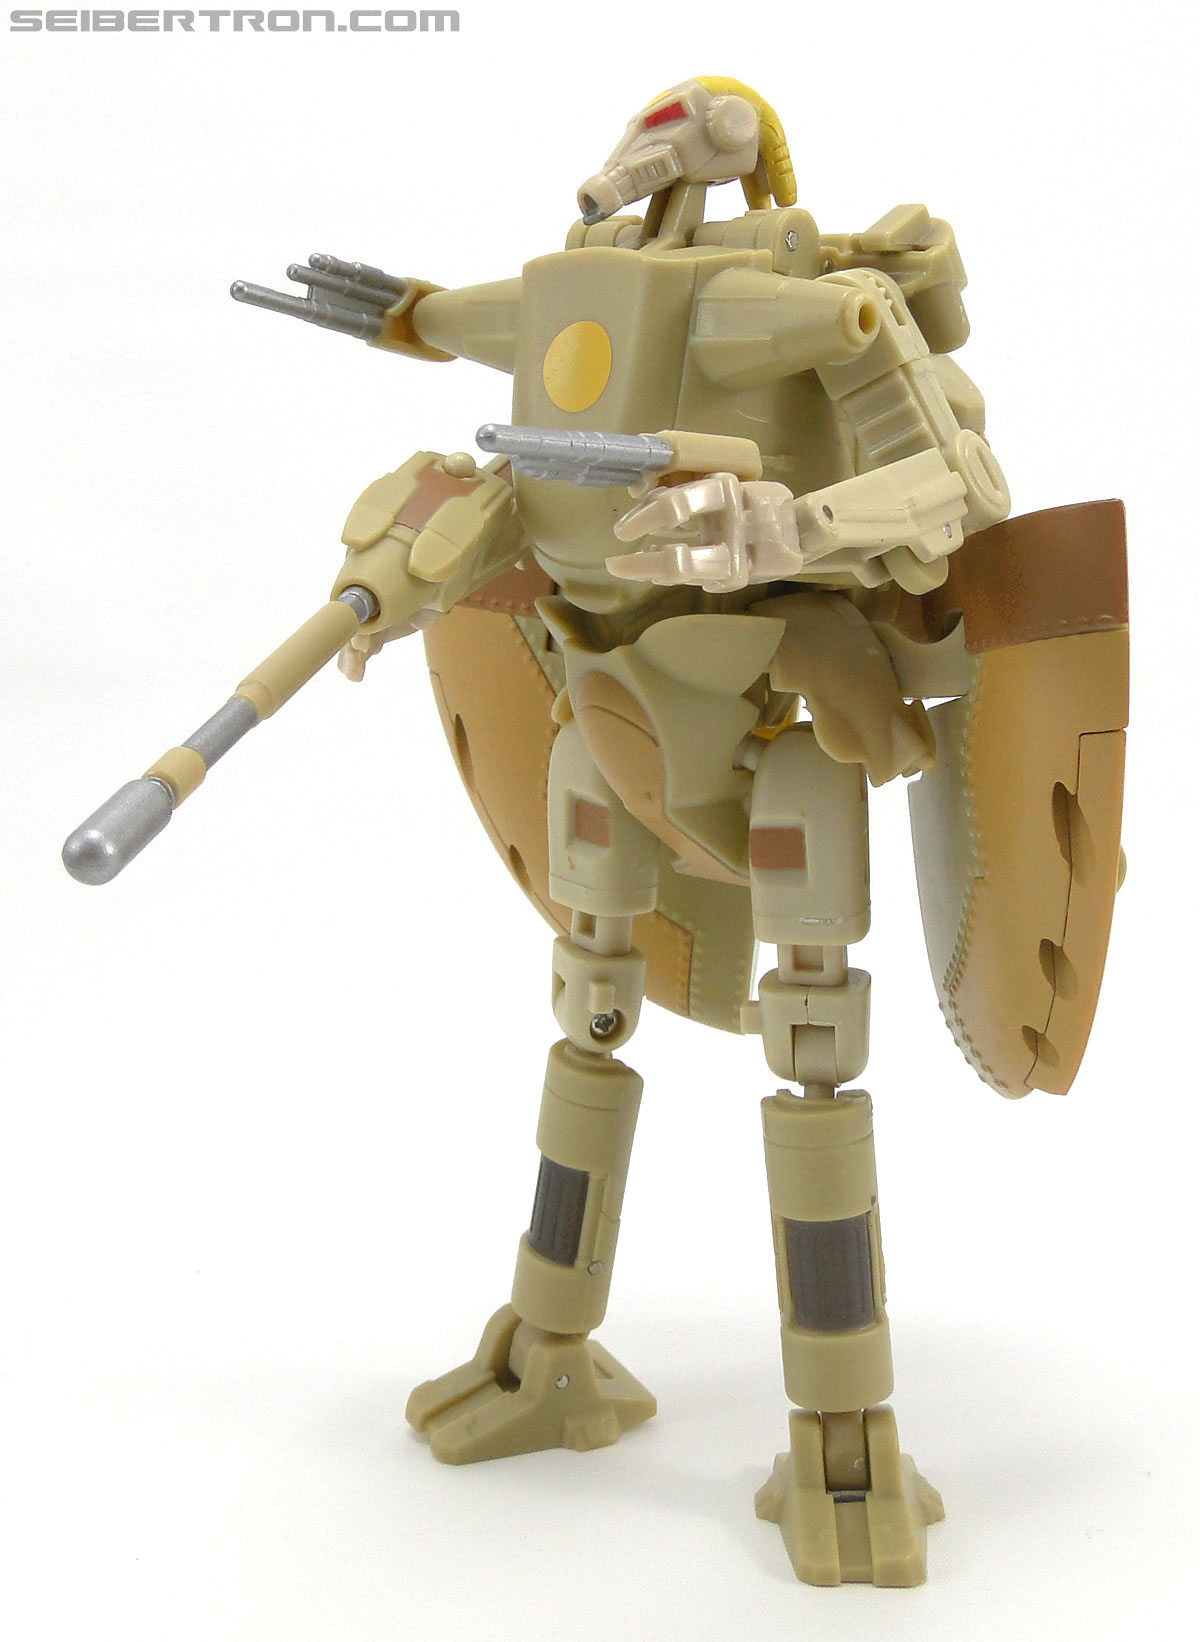 Star Wars Transformers Battle Droid Commader (Armored Assault Tank) (Battle Droid Commader) (Image #71 of 85)